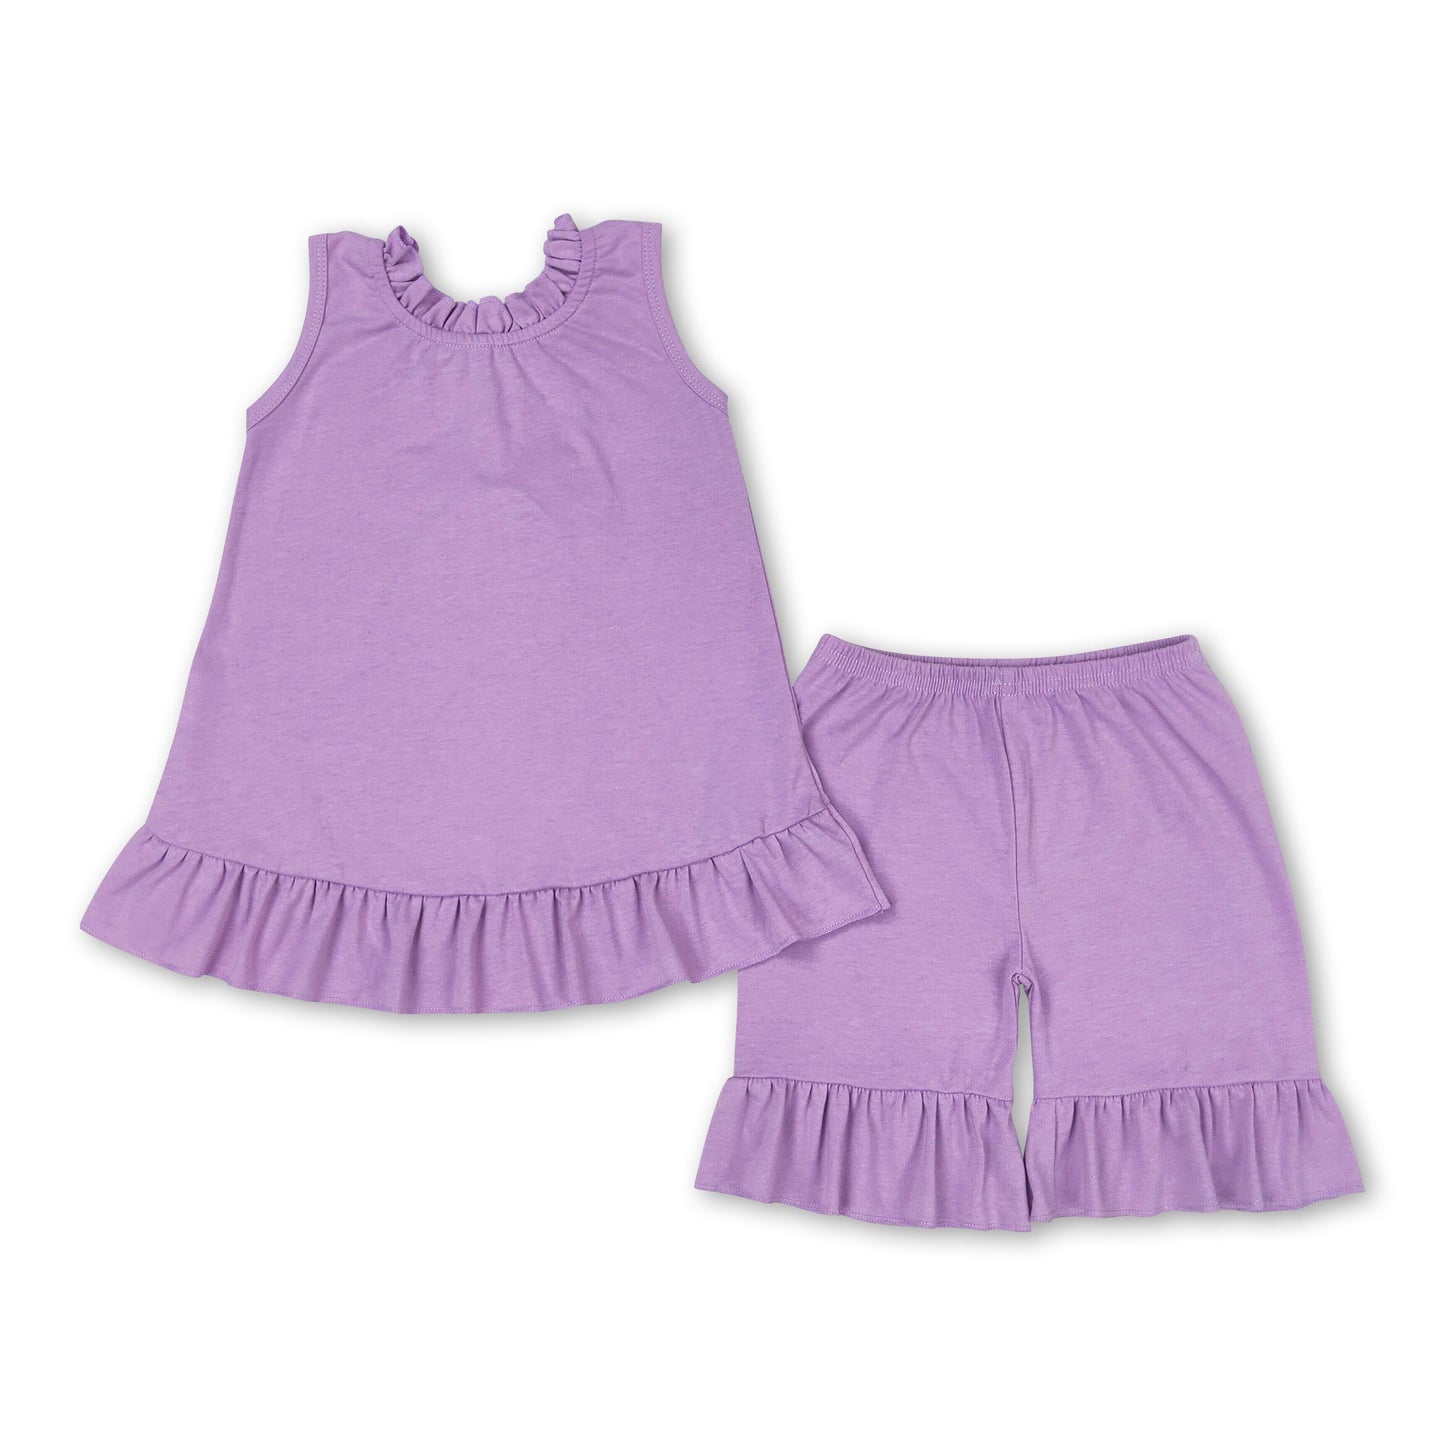 Lavender cotton sleeveless bow backless girls summer outfits